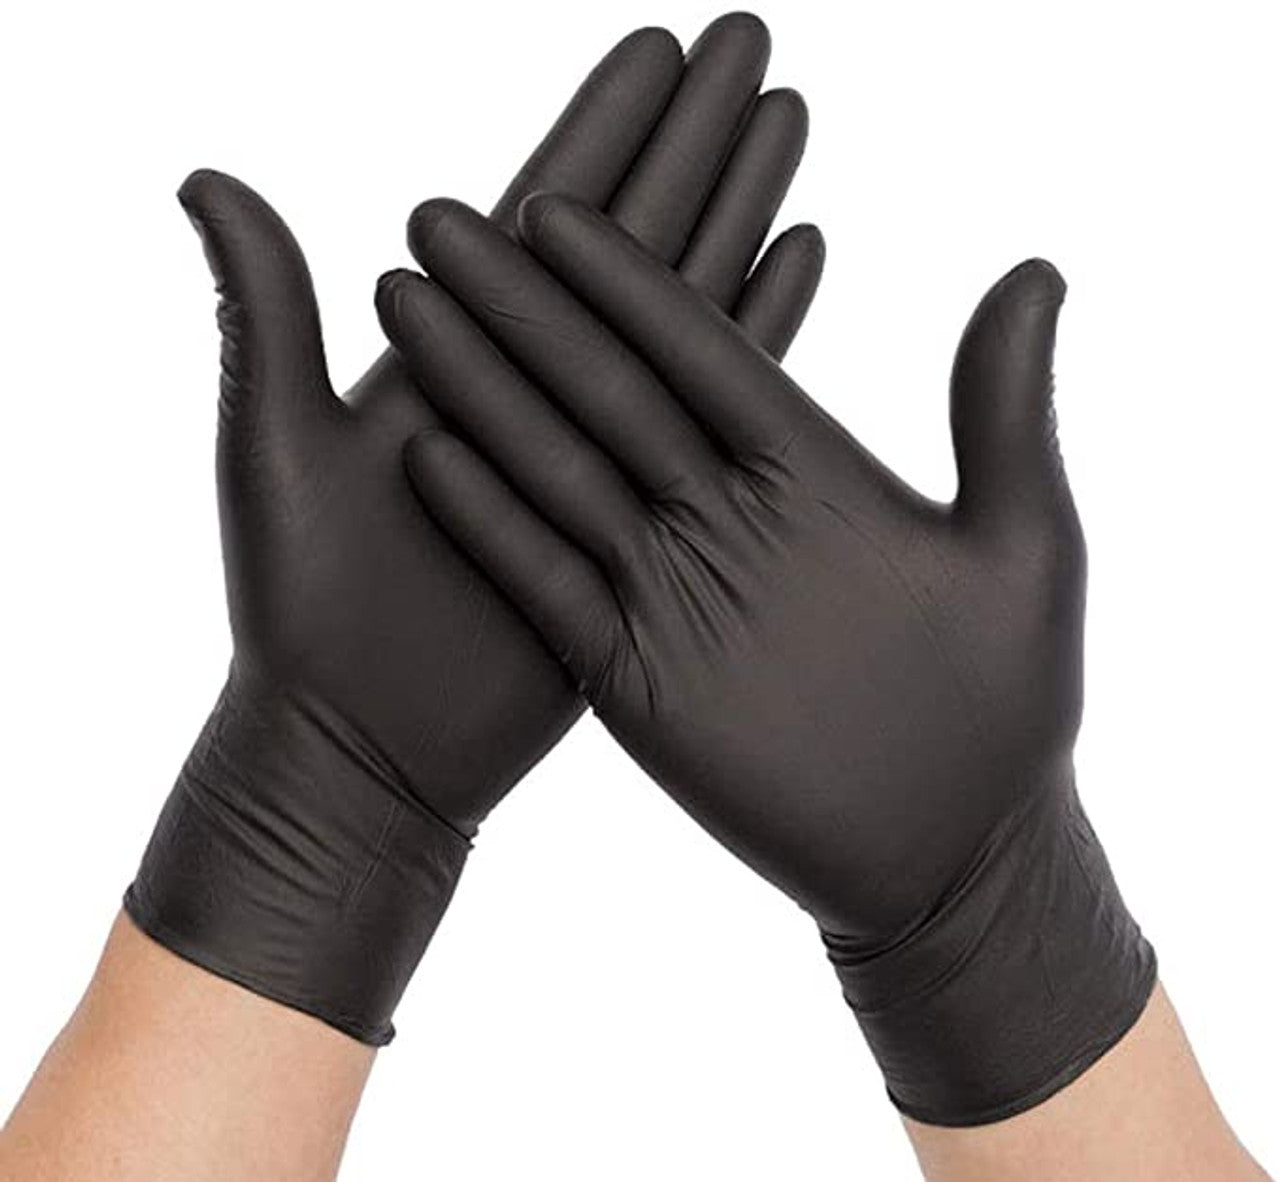 Black Exam Nitrile Gloves Small By Sempermed 100CT Box